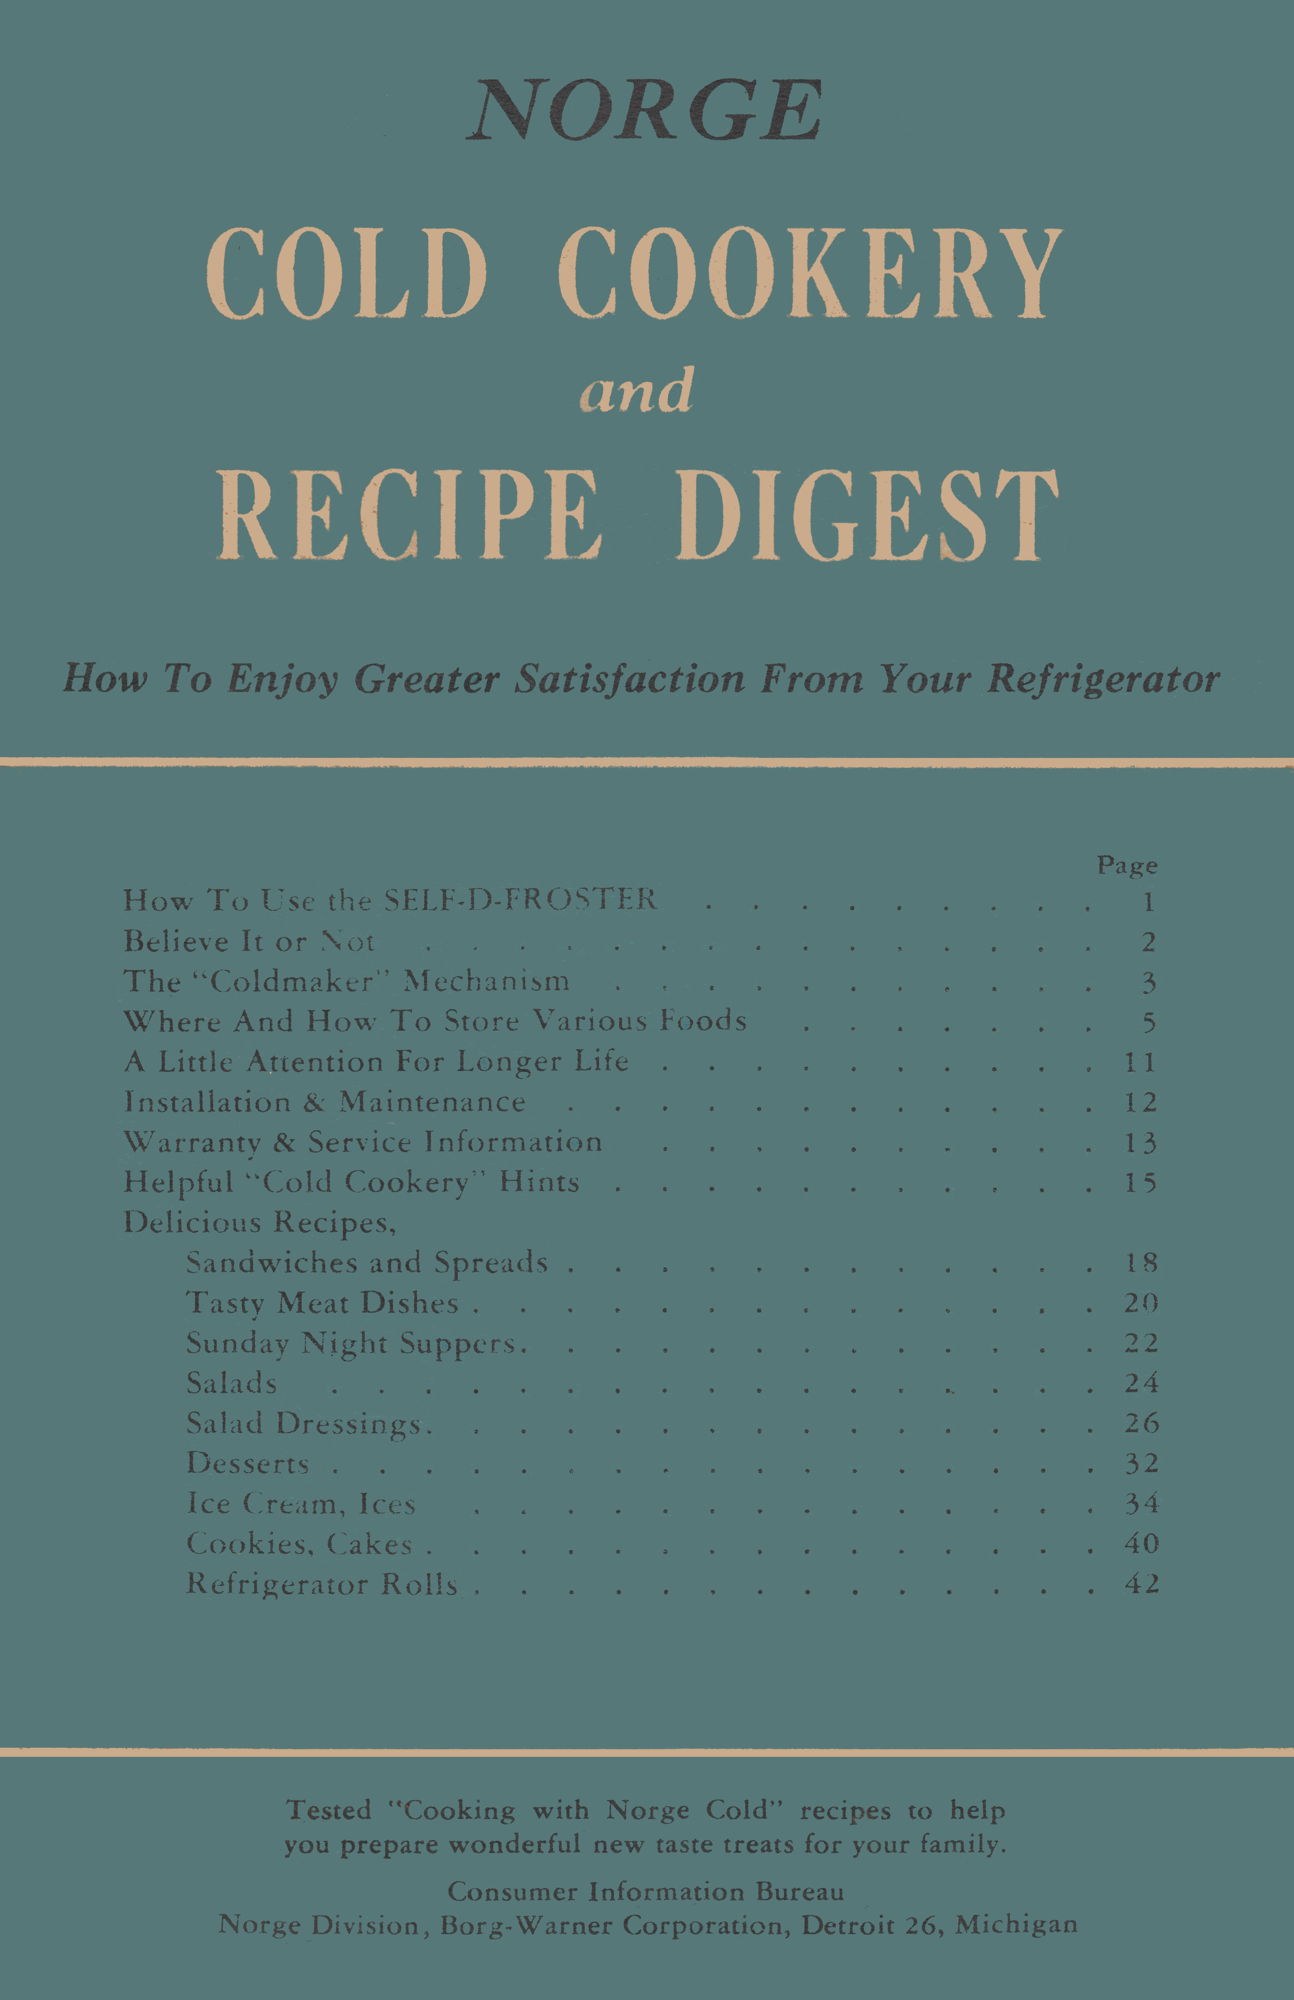 Norge Cold Cookery and Recipe Digest: “How to Enjoy Greater Satisfaction From Your Refrigerator”. A circa 1947 manual and recipe book for the Norge home refrigerator.; cookbooks; refrigerators